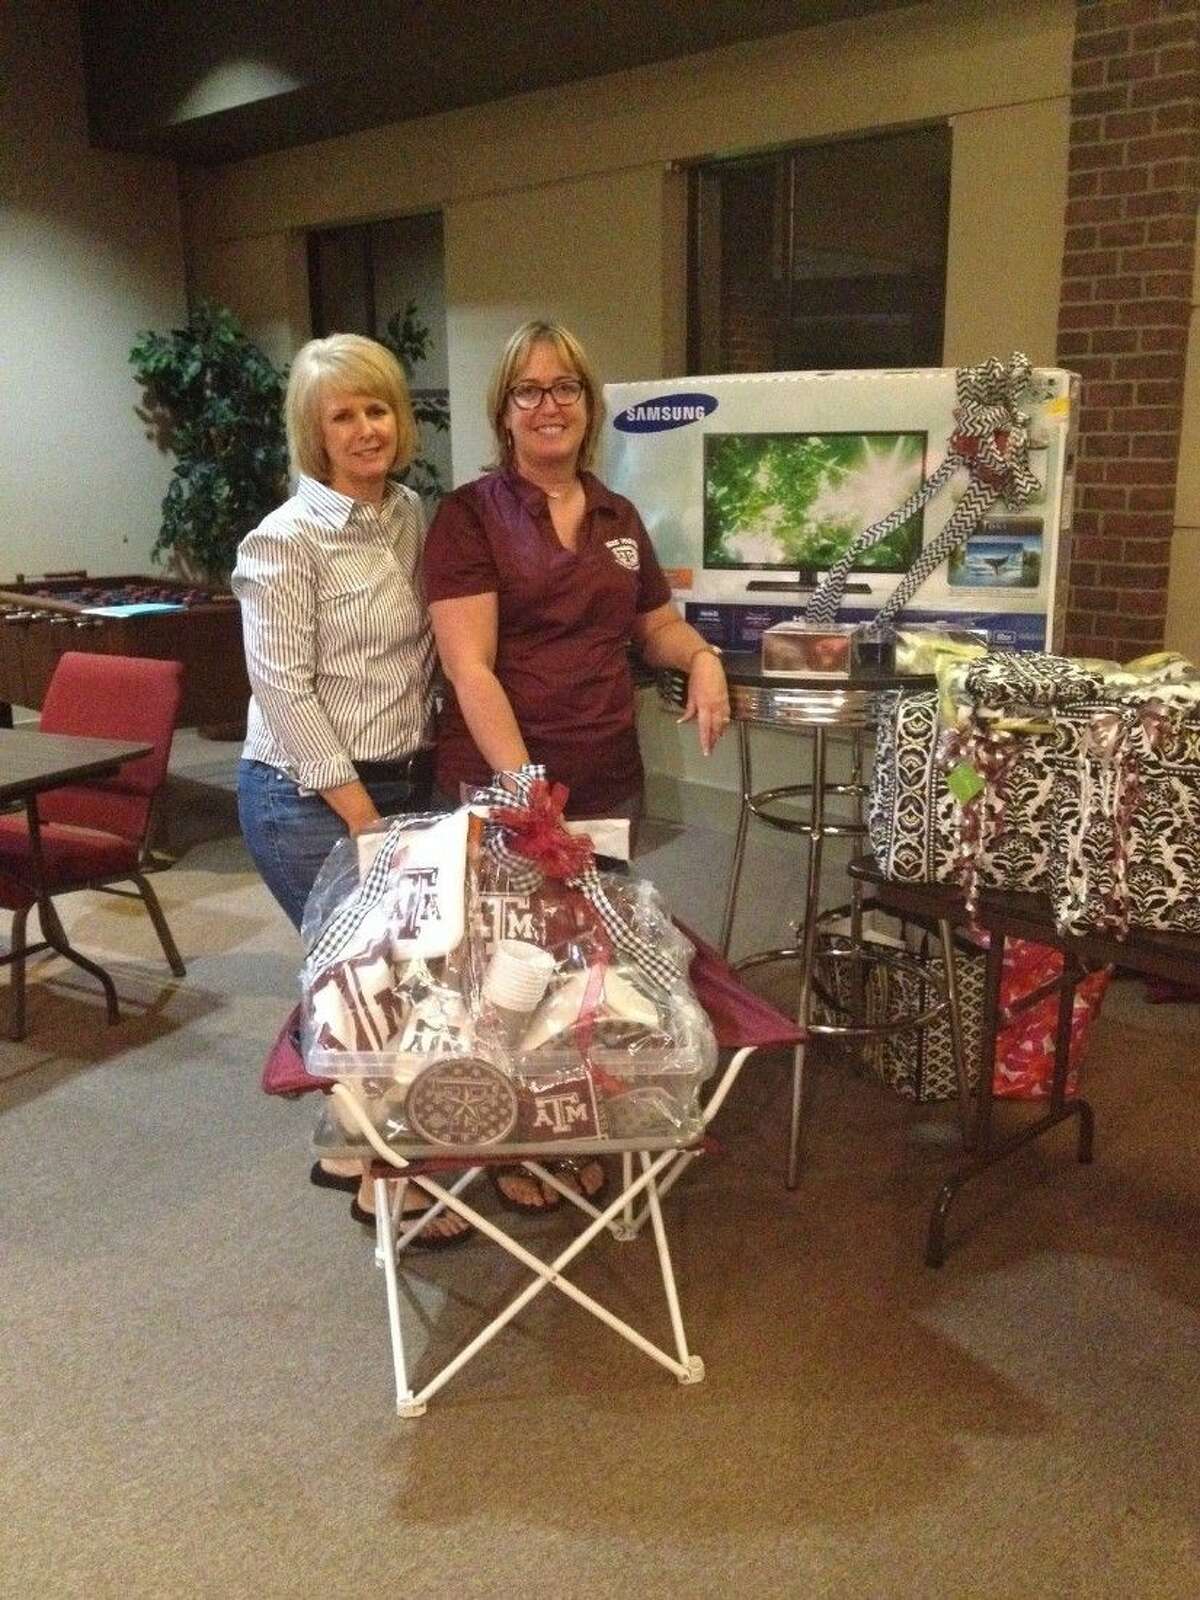 Gayle Keller and Geralyn Sullivan, KH Aggie Moms Tradition Banquet Chairpersons, pictured with some of the great raffle and auction items we will have at the banquet.